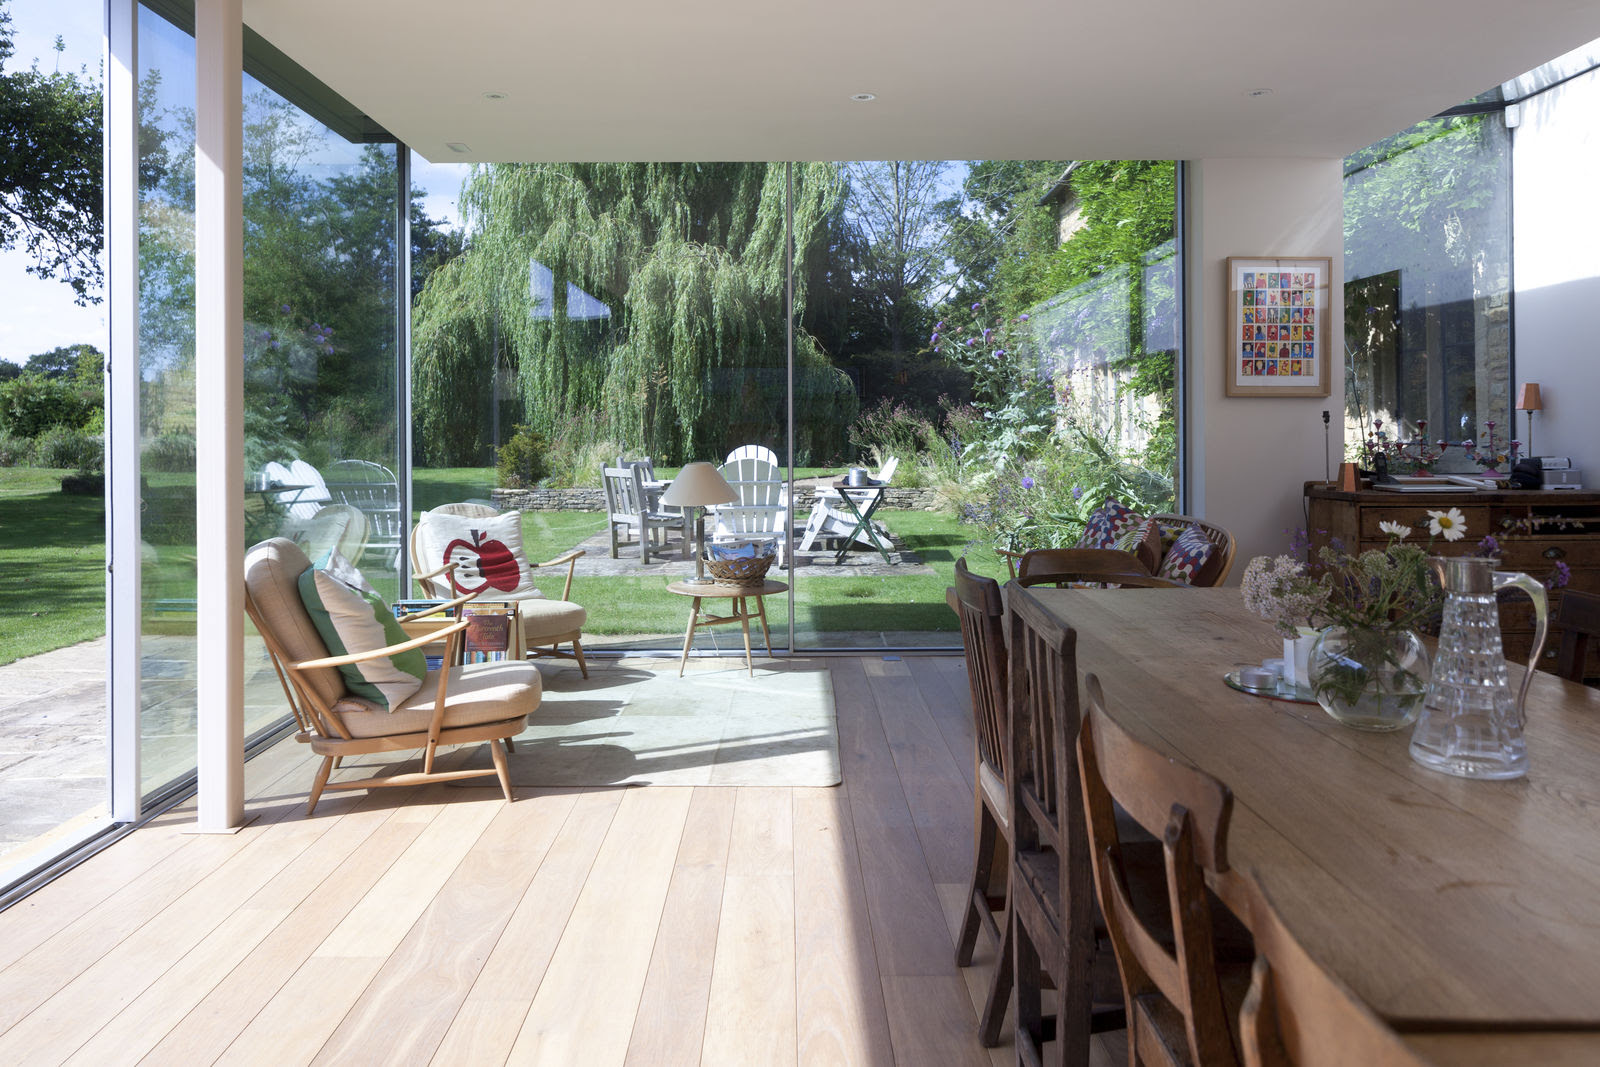 A dining room area that opens into the garden